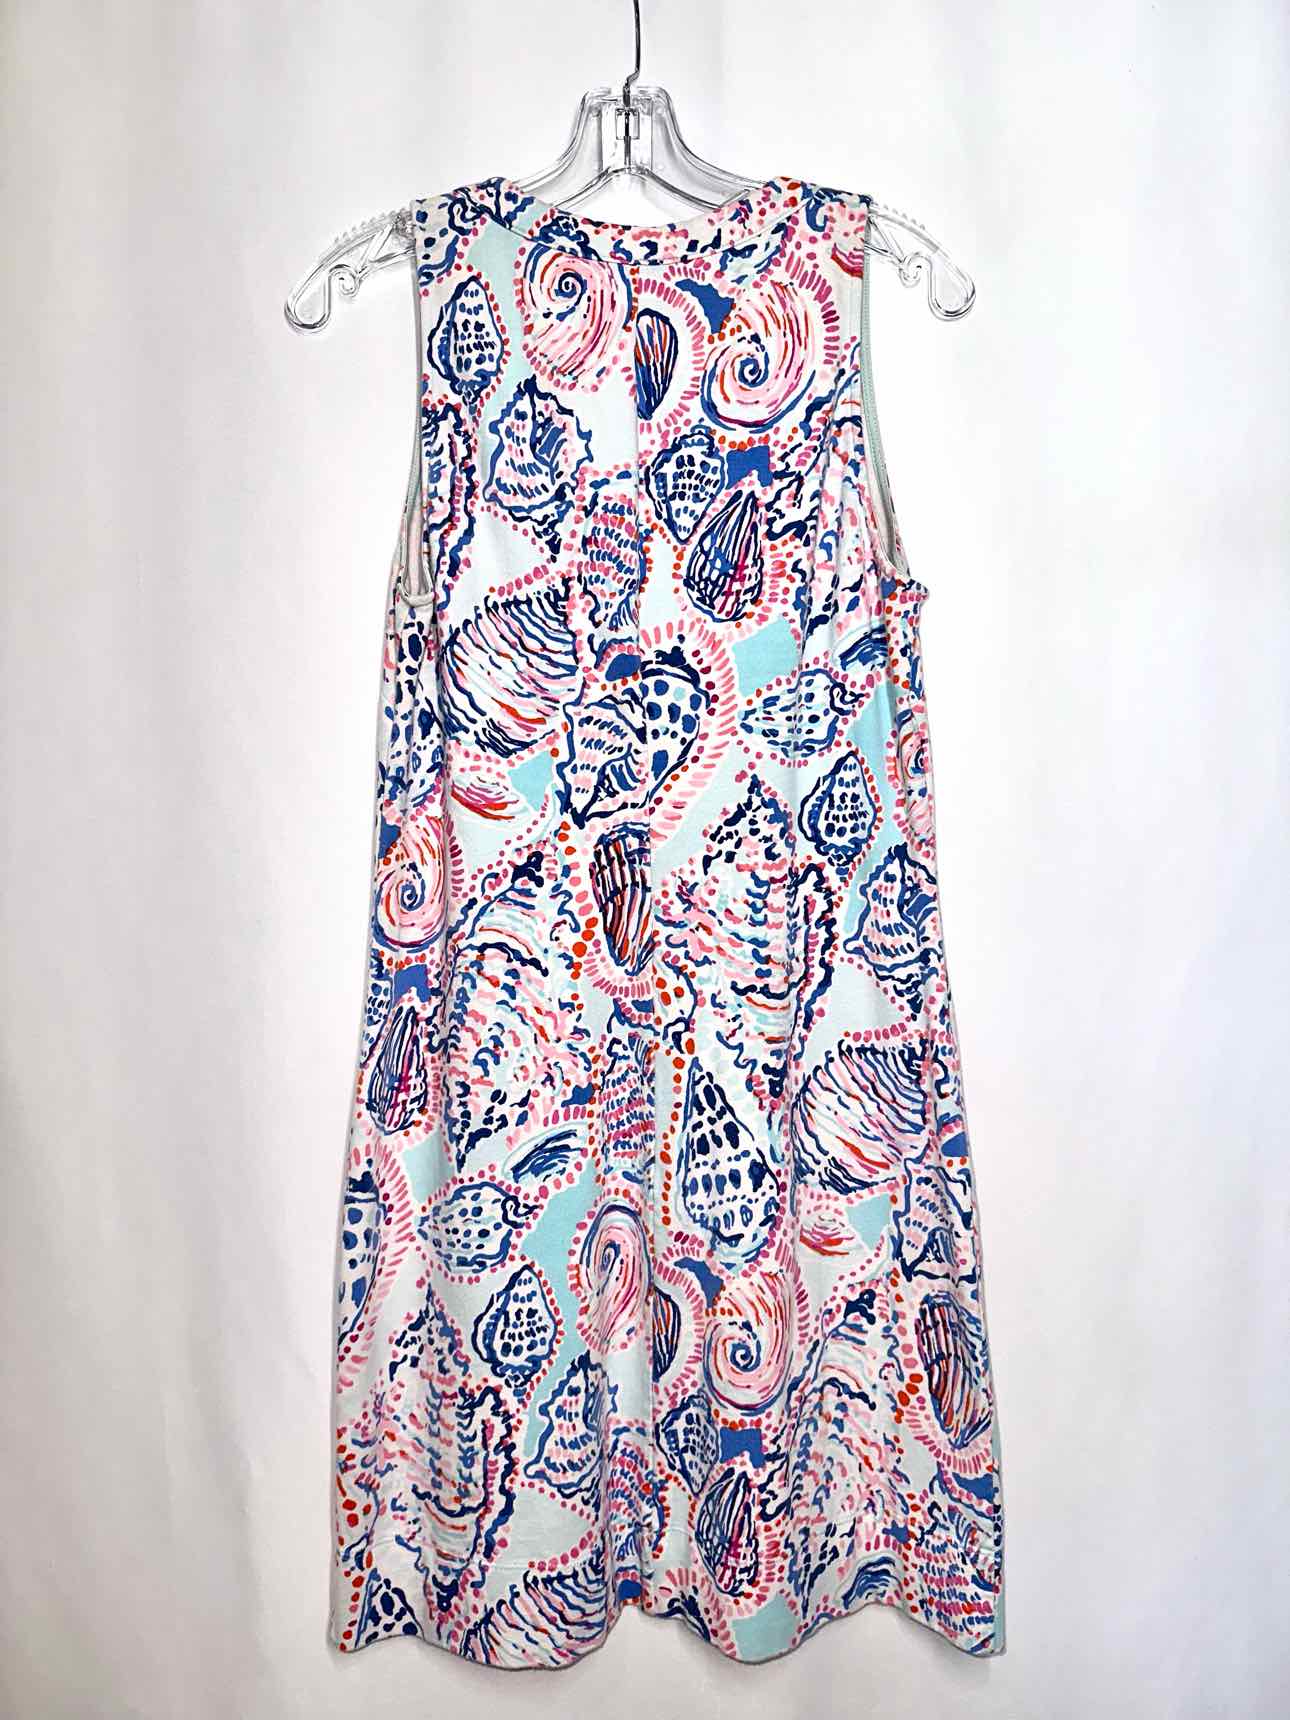 Lilly Pulitzer Shell Me About It Dress